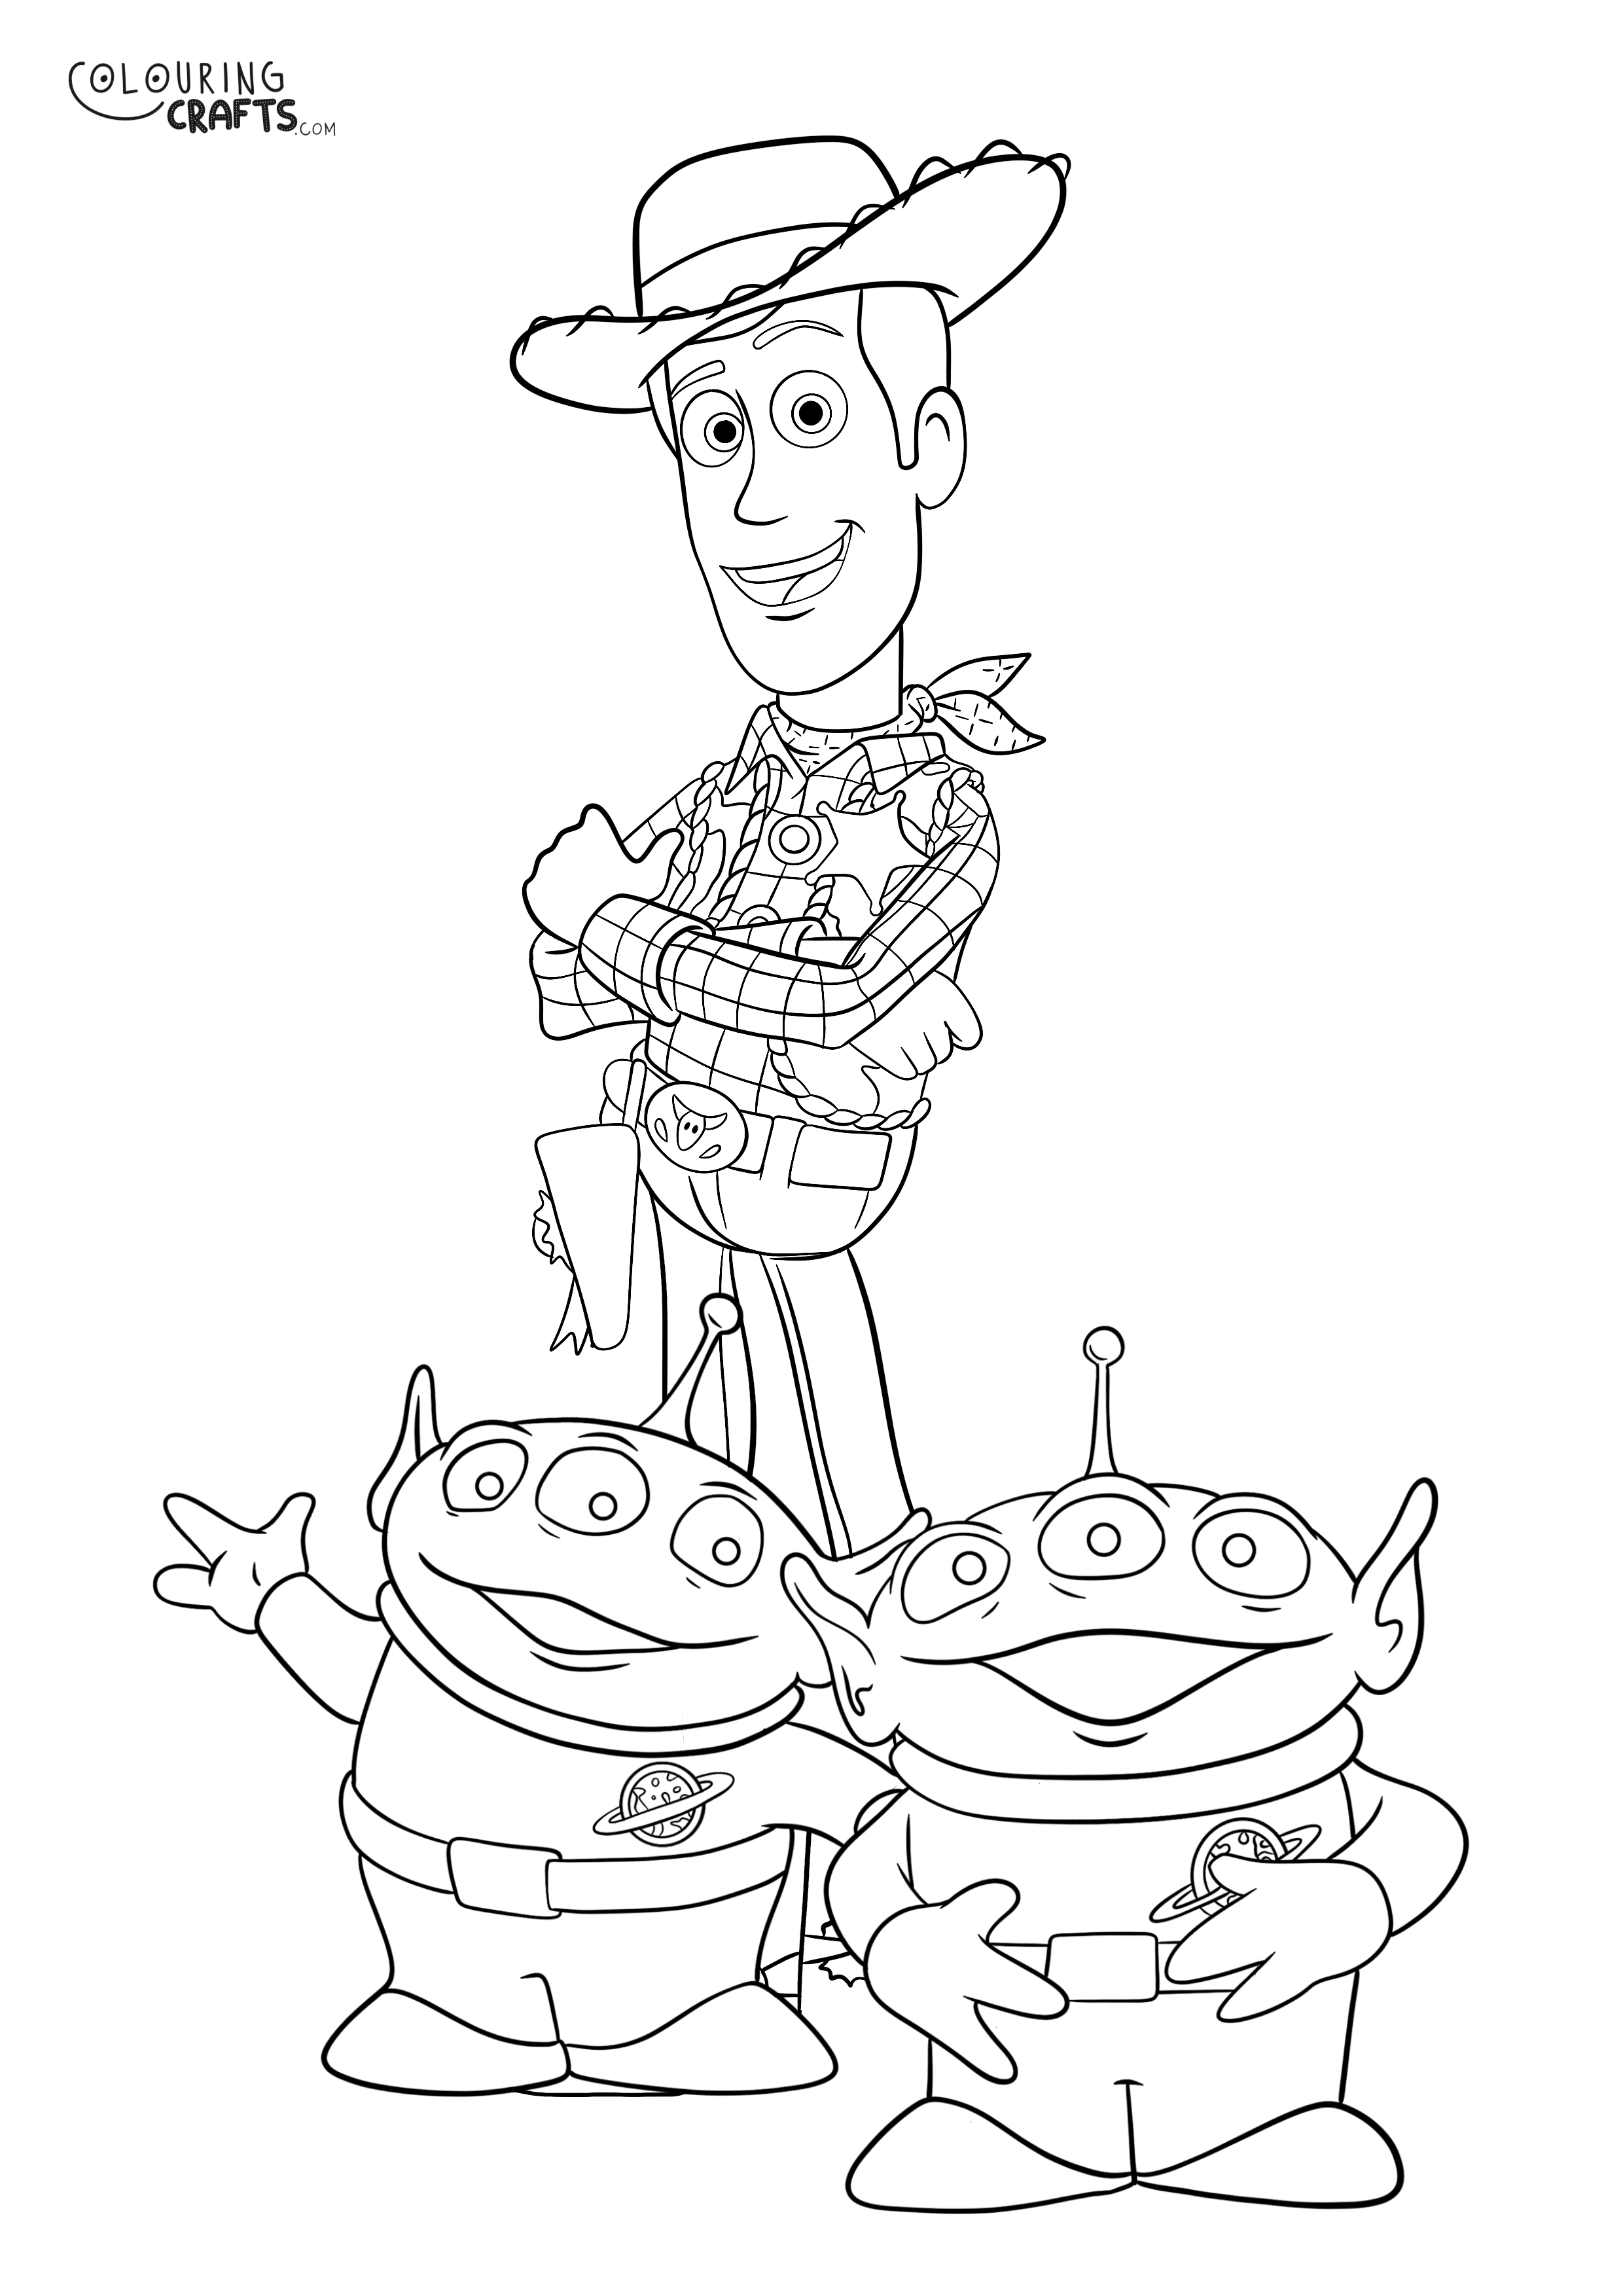 Toy Story Woody And Aliens Colouring Page - Colouring Crafts